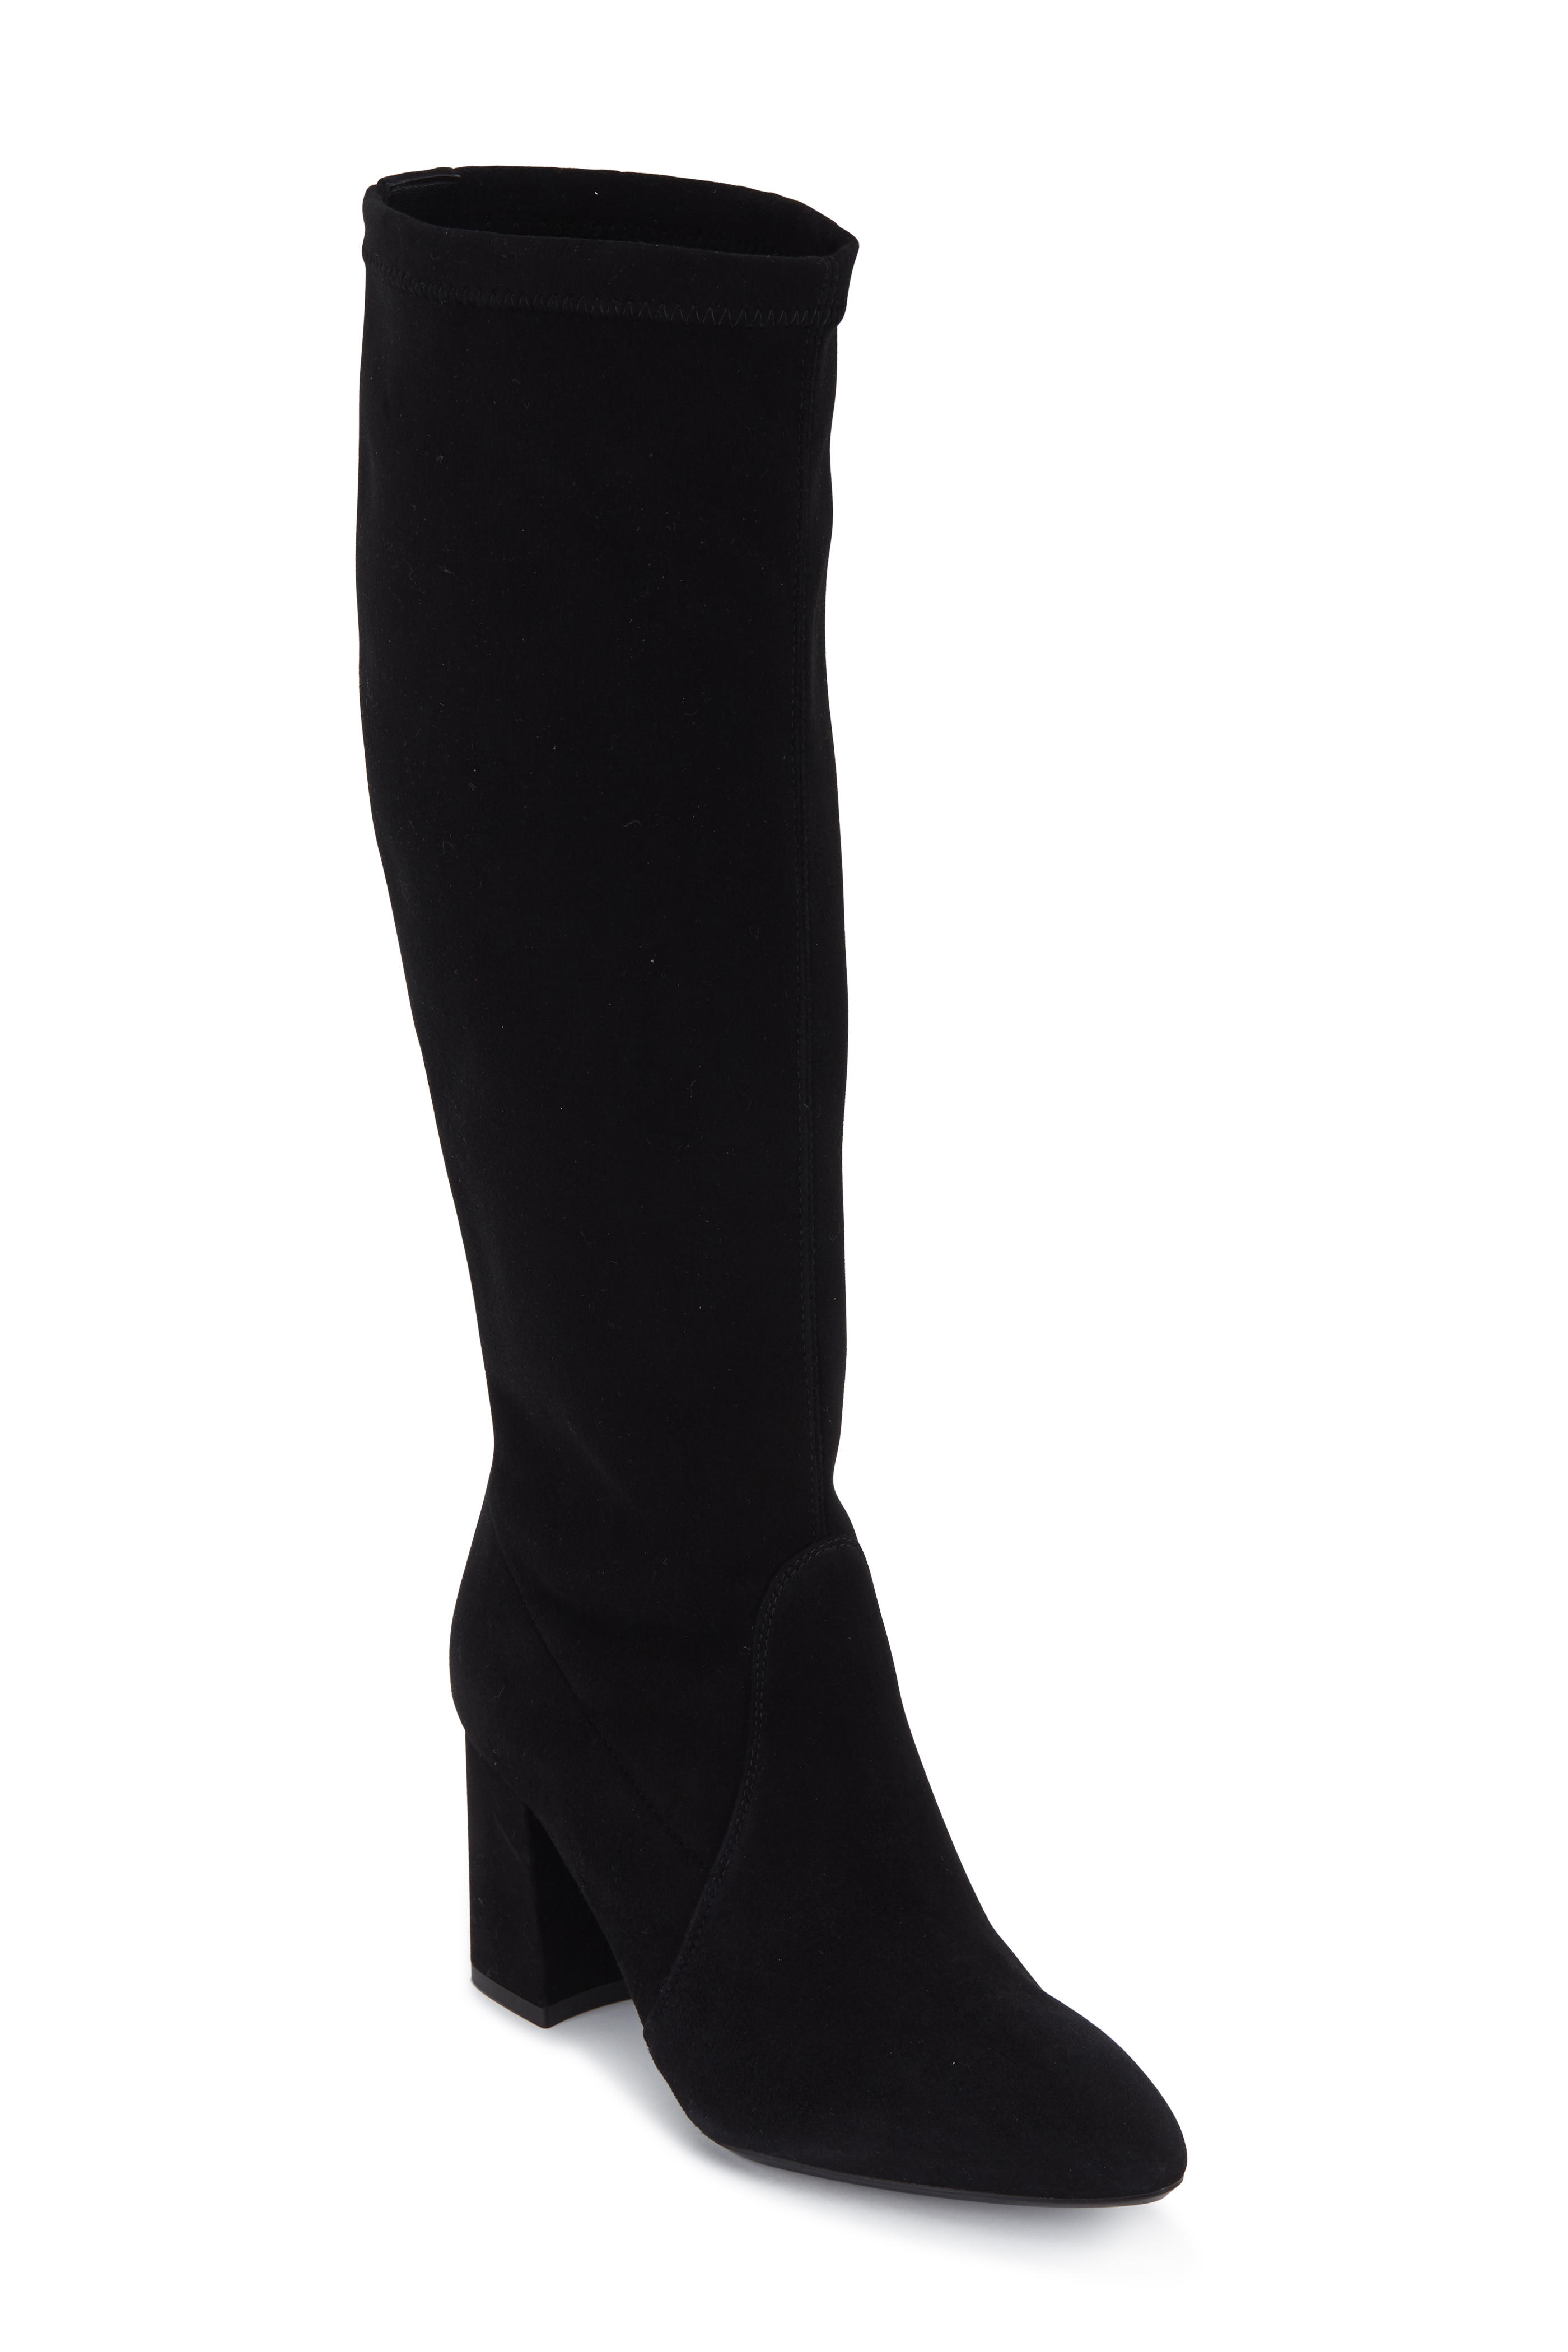 Phillina Black Stretch Suede Tall Boot 